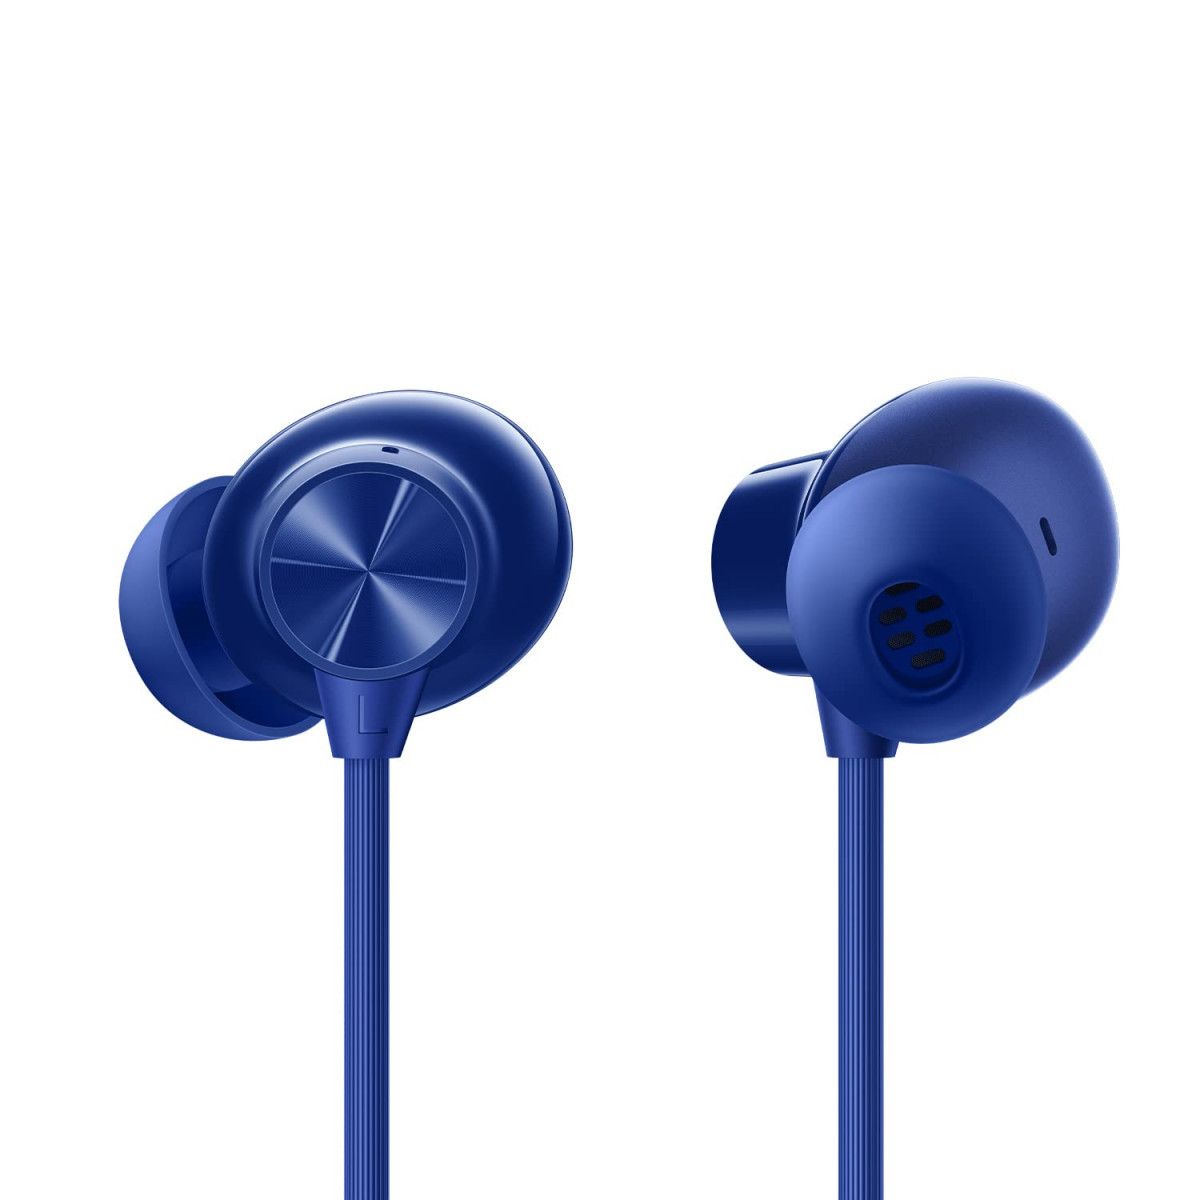 OnePlus Bullets Z2 Bluetooth Wireless in Ear Earphones with Mic Bombastic Bass - 124 Mm Drivers 10 Mins Charge - 20 Hrs Music 30 Hrs Battery Life Beam Blue